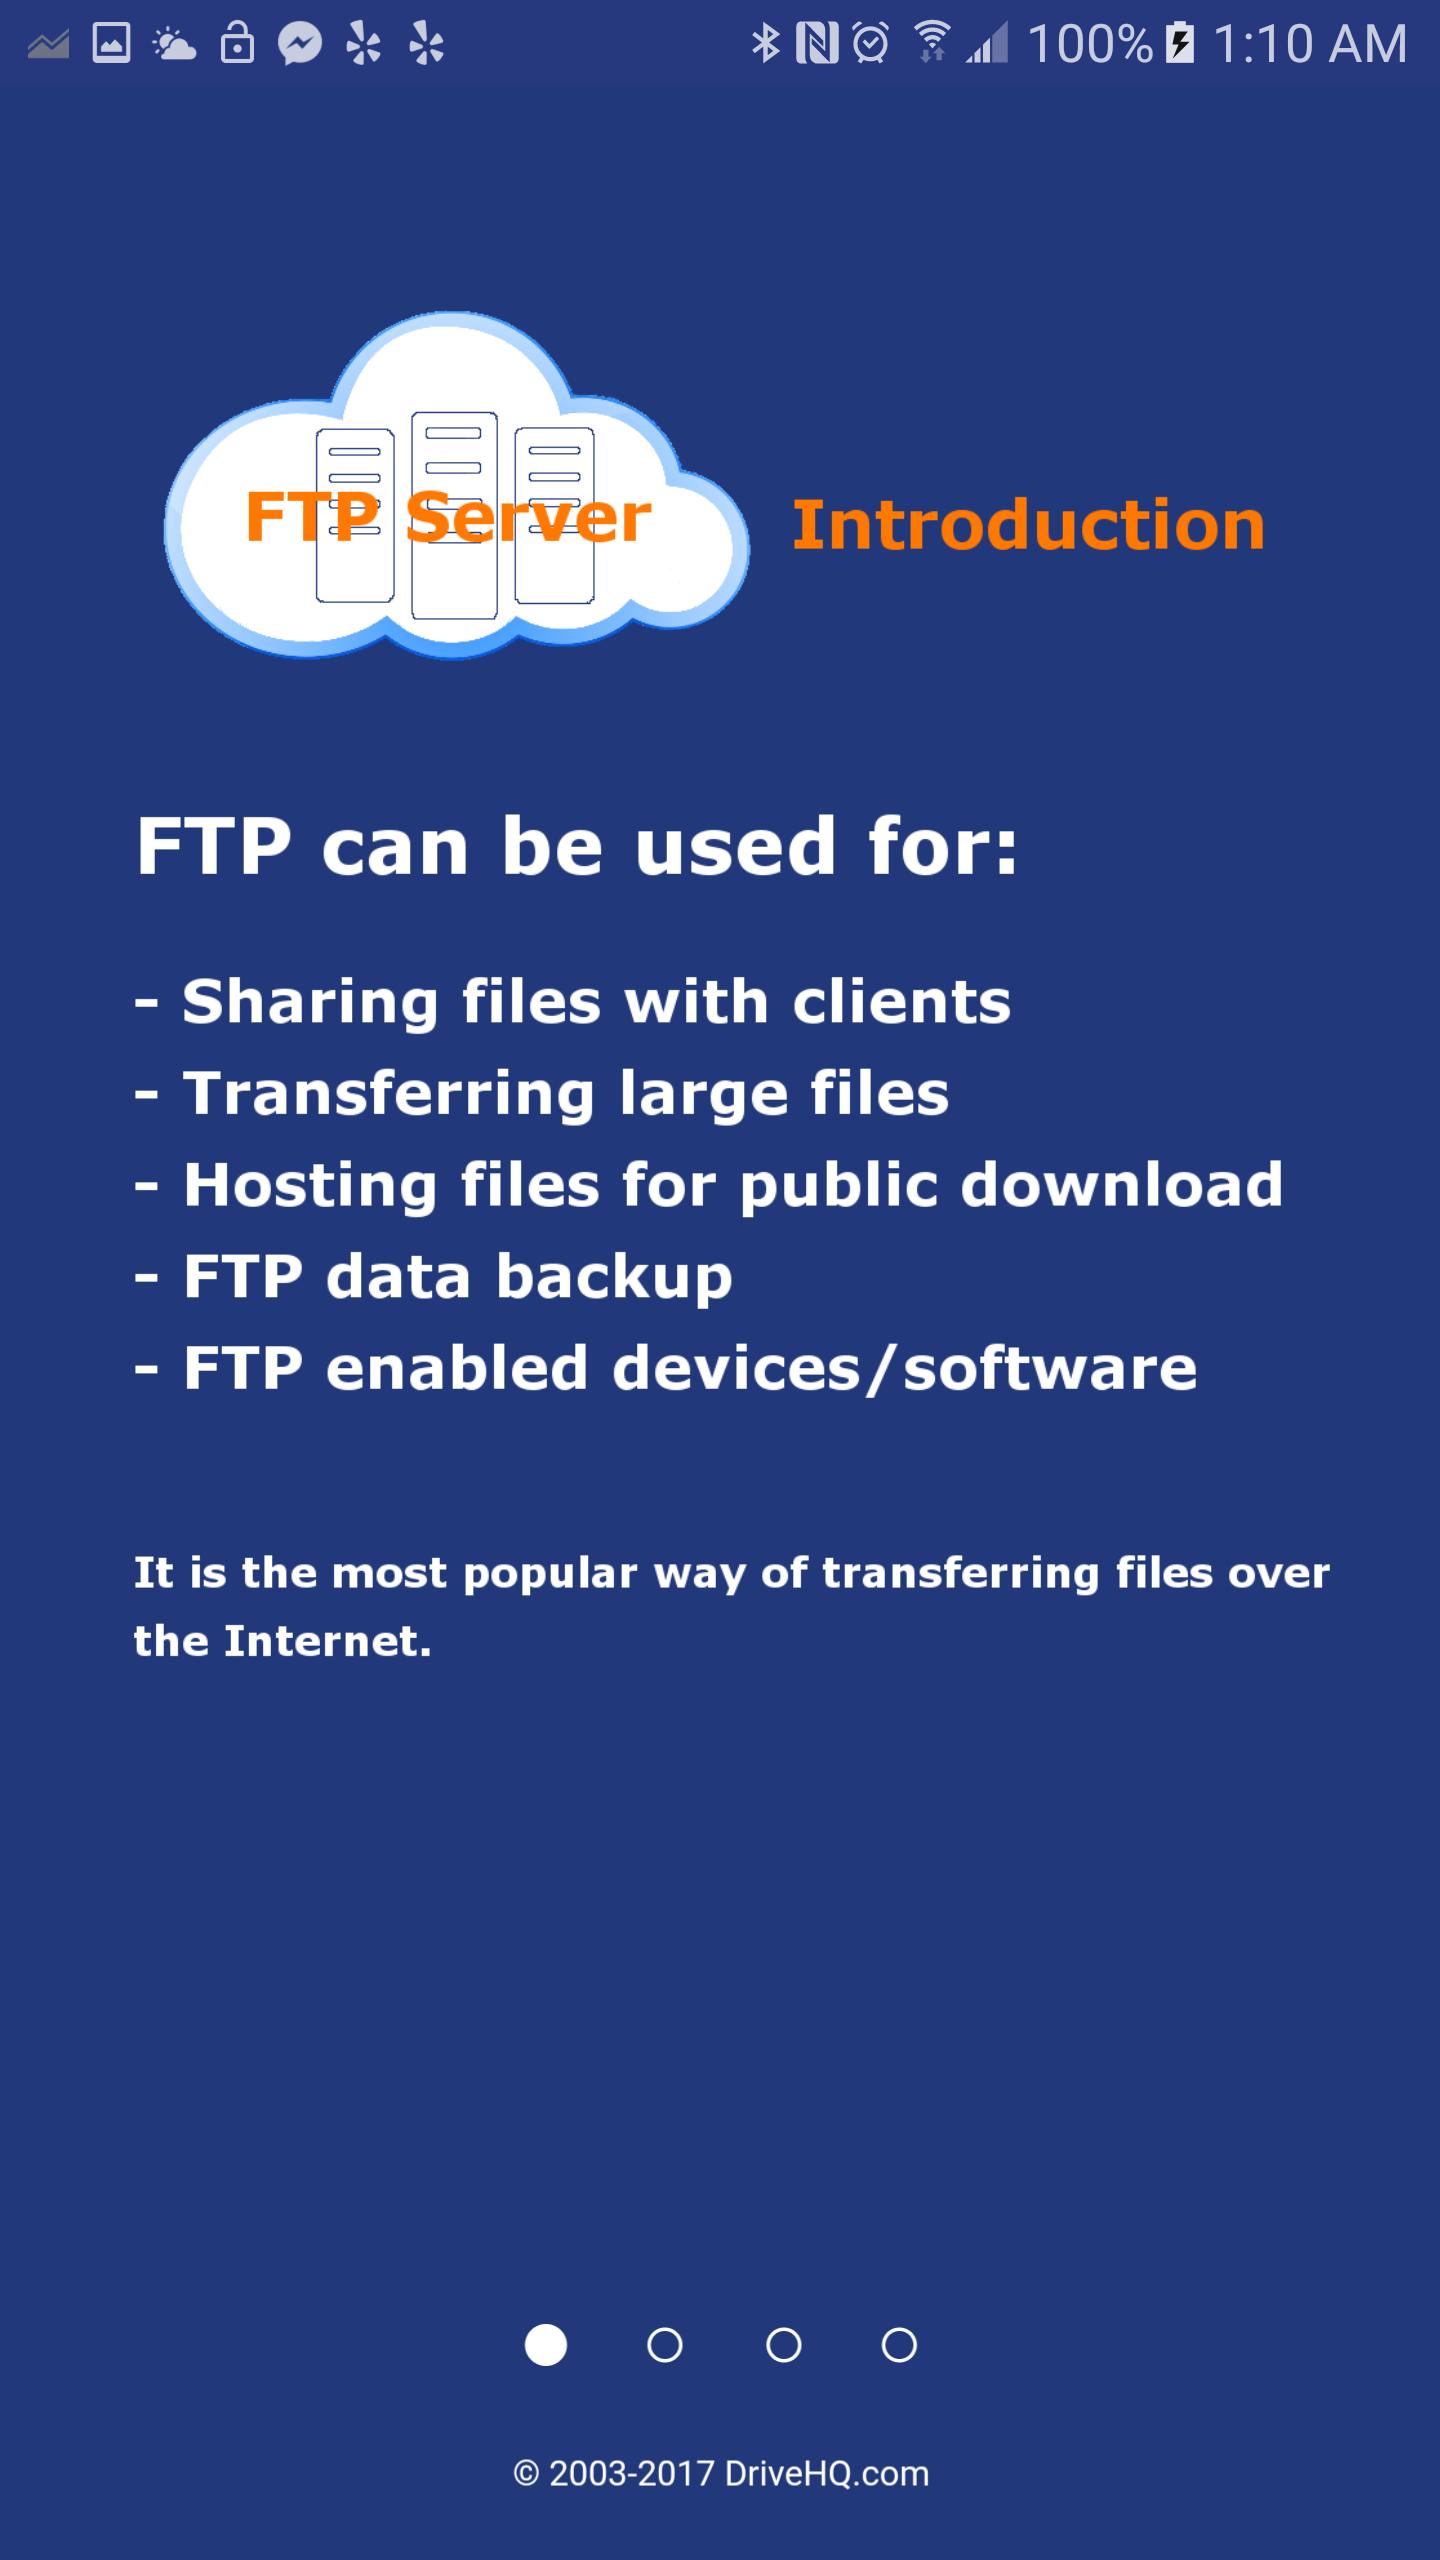 Cloud FTP Server by Drive HQ for Android - APK Download